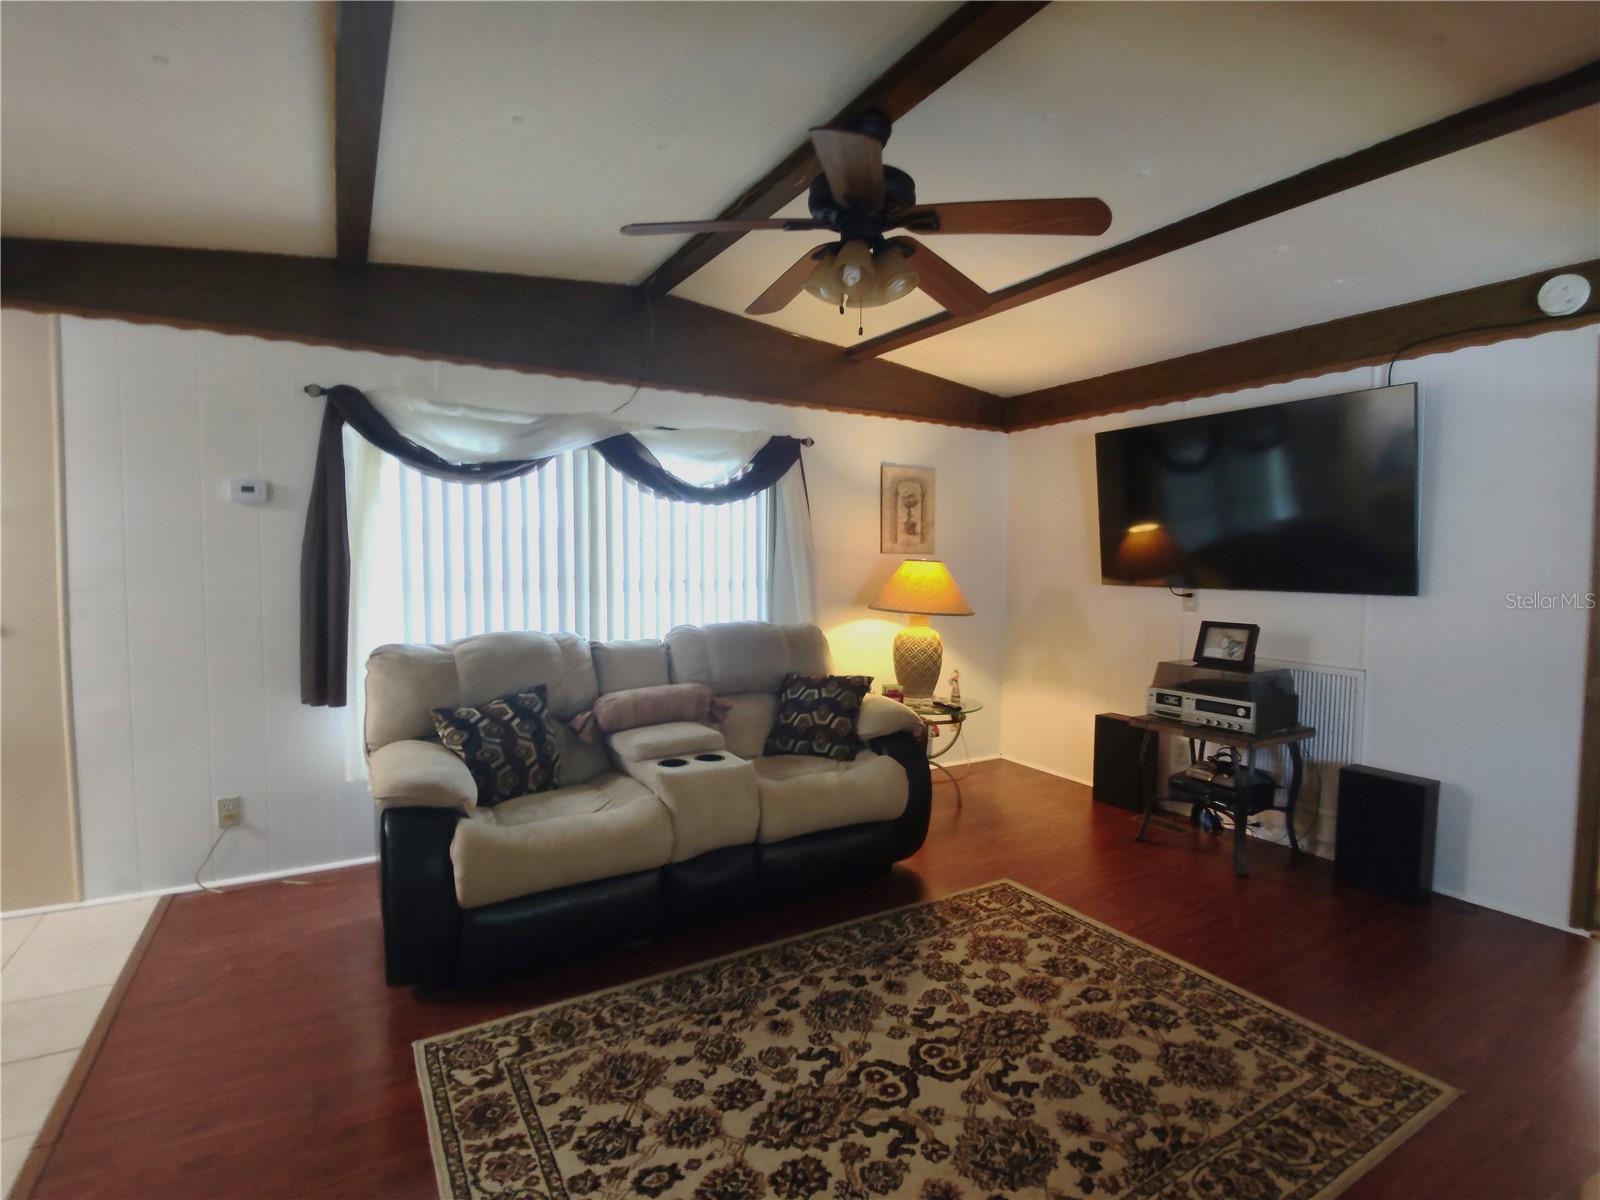 Recently painted living area features gorgeous wood laminate flooring, ceiling fan and a vaulted ceiling.